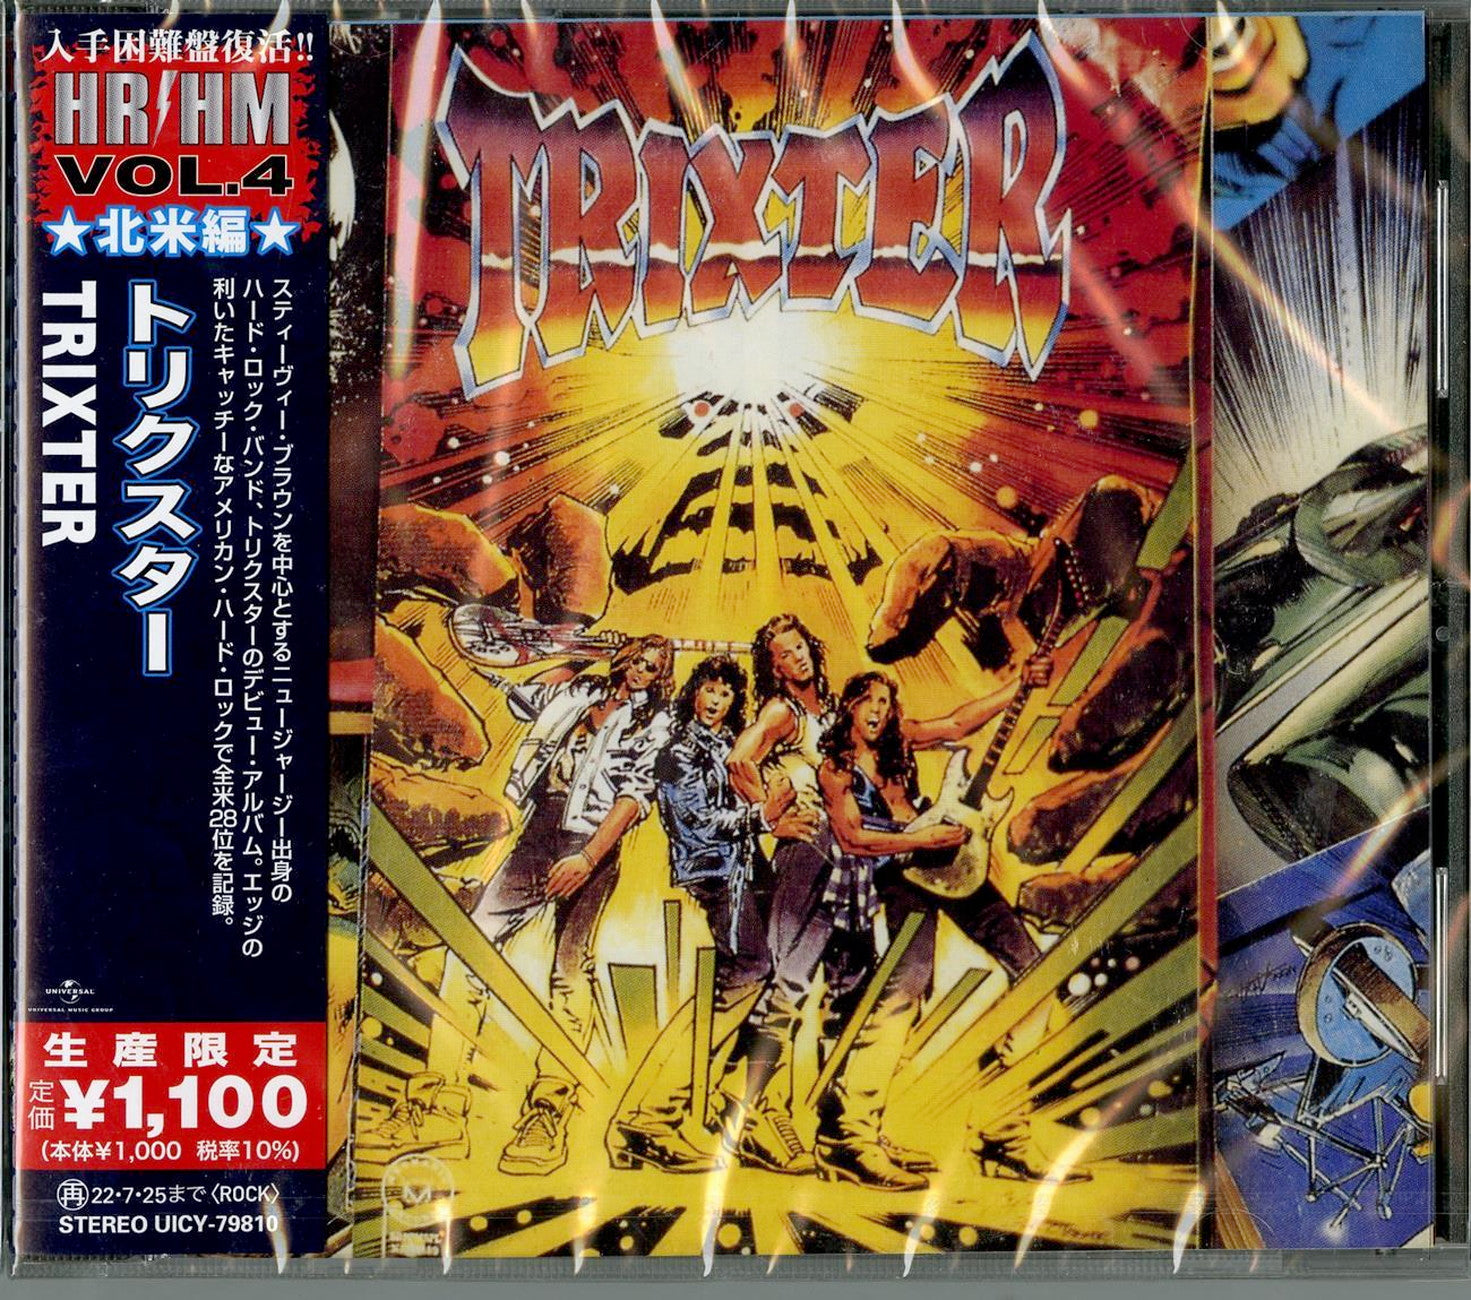 TRIXTER レア盤 alive in japan - 洋楽